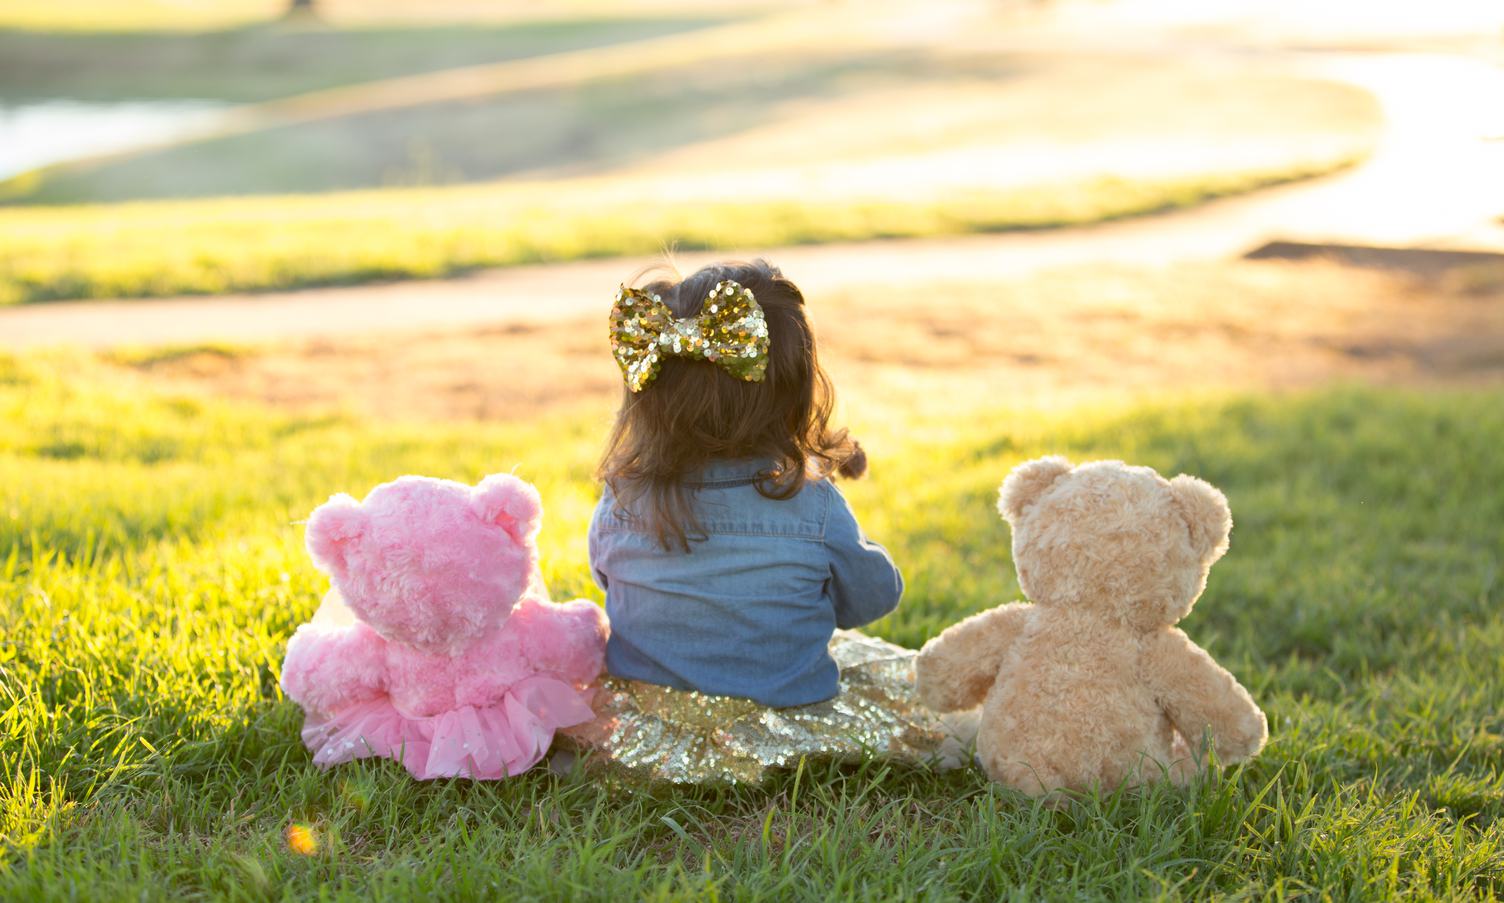 Little Girl Sitting on the Grass with Her Teddy Bears